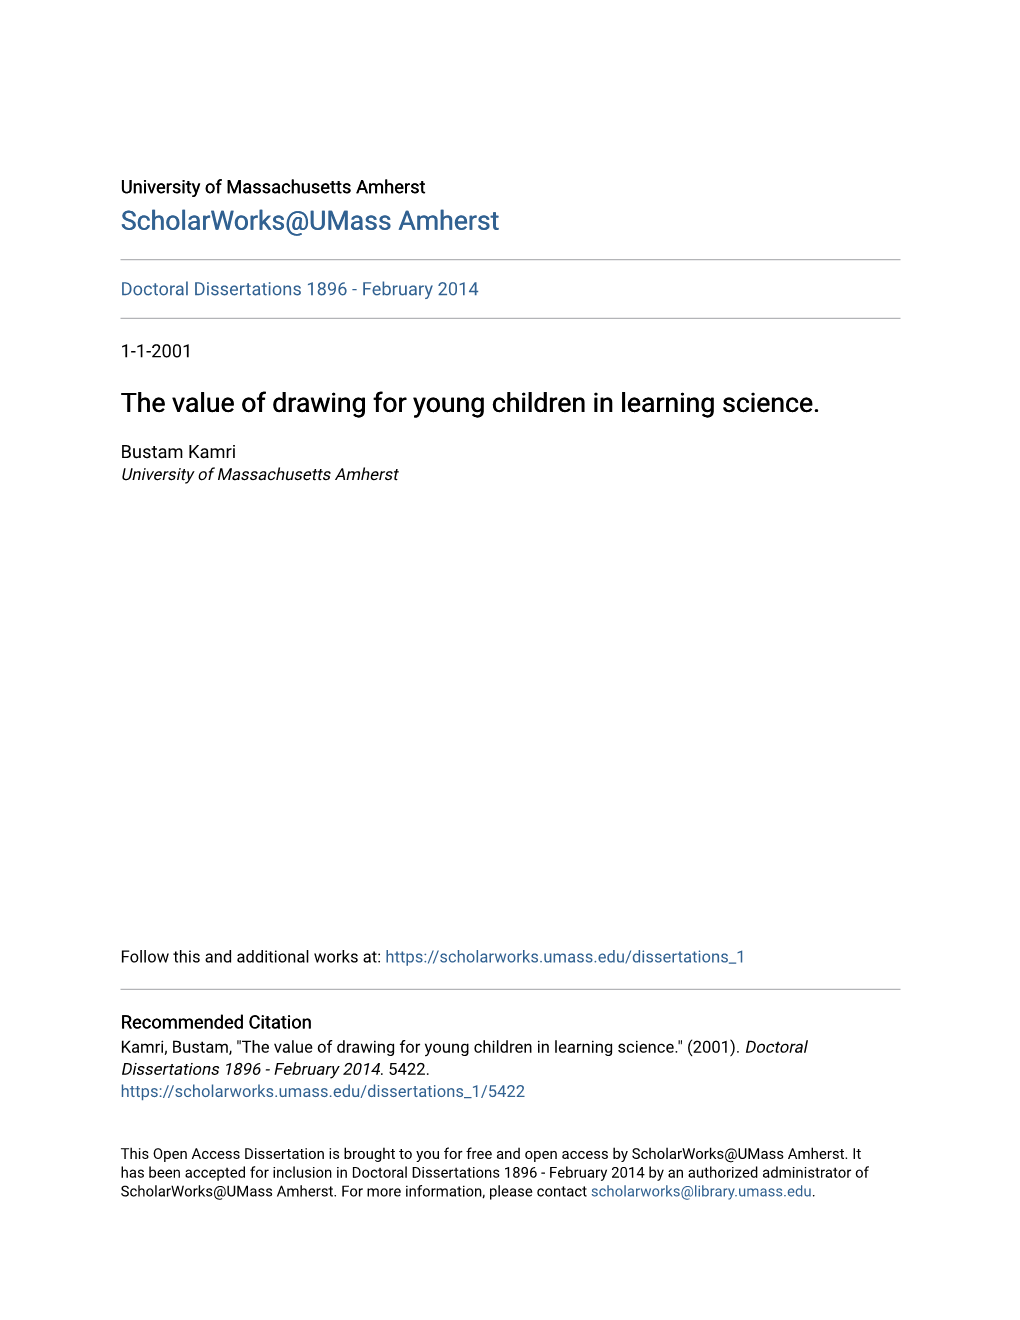 The Value of Drawing for Young Children in Learning Science